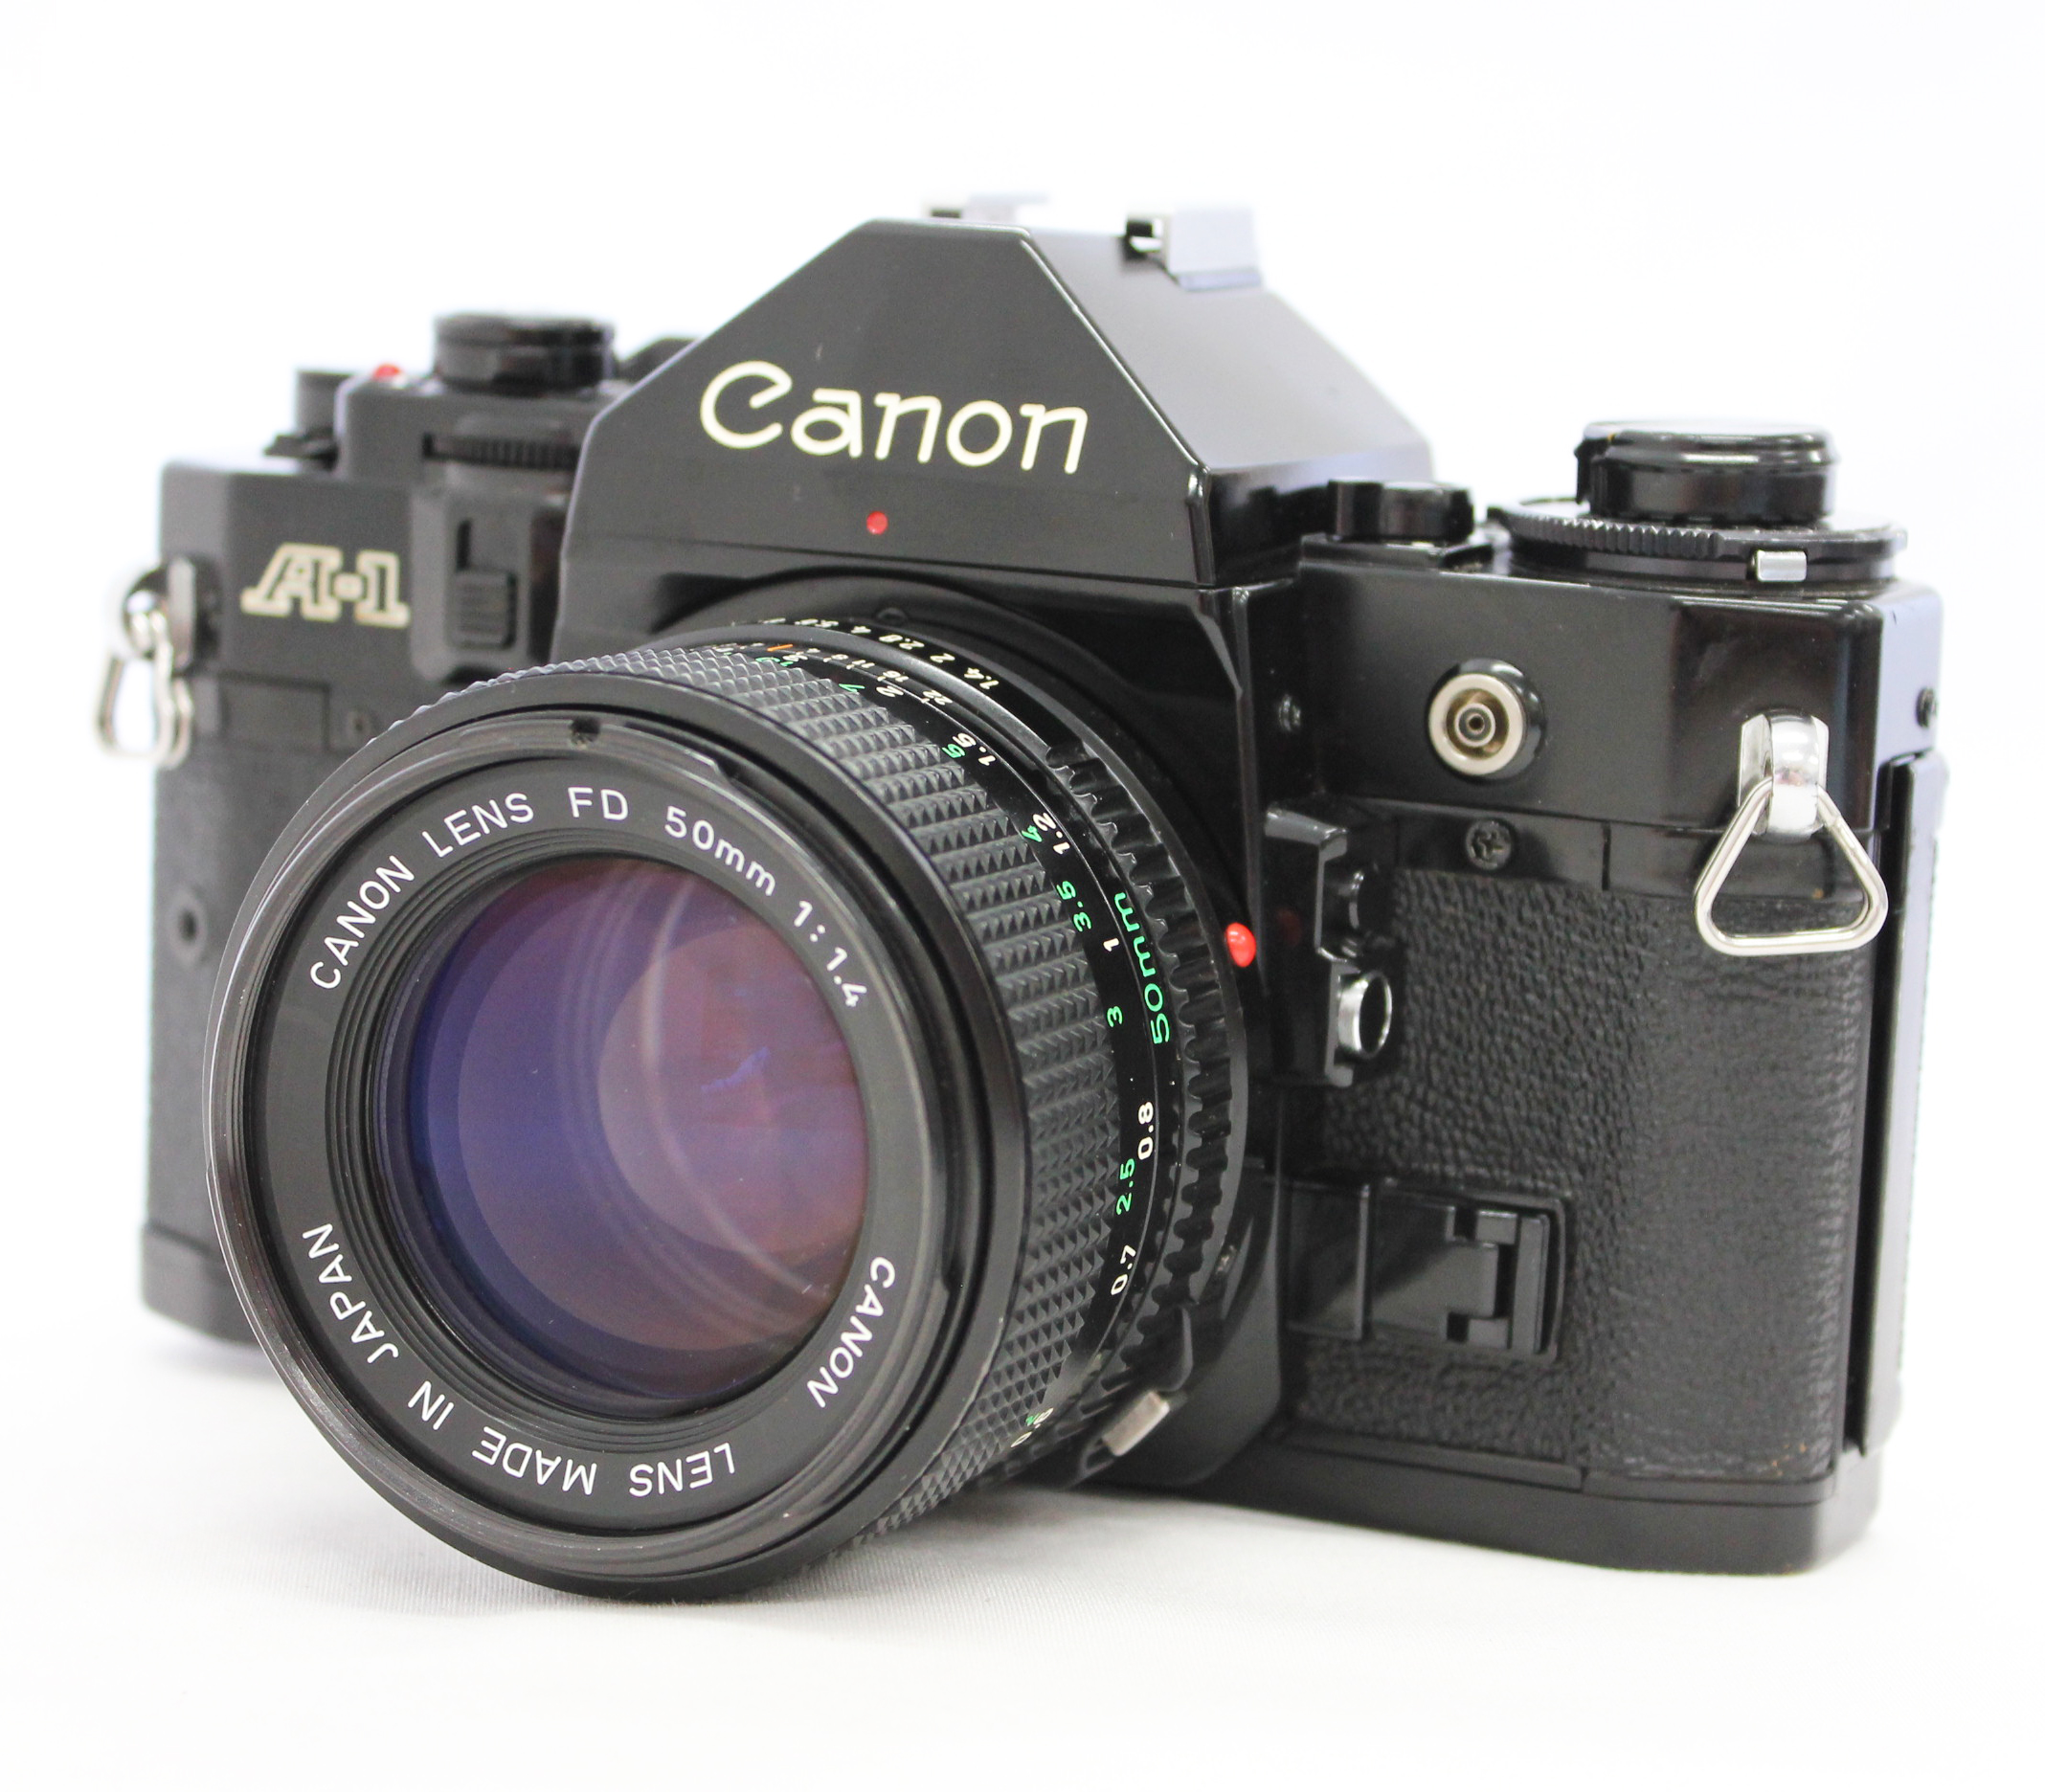 Japan Used Camera Shop | [Excellent+++++] Canon A-1 35mm SLR Film Camera with New FD 50mm F/1.4 Lens from Japan